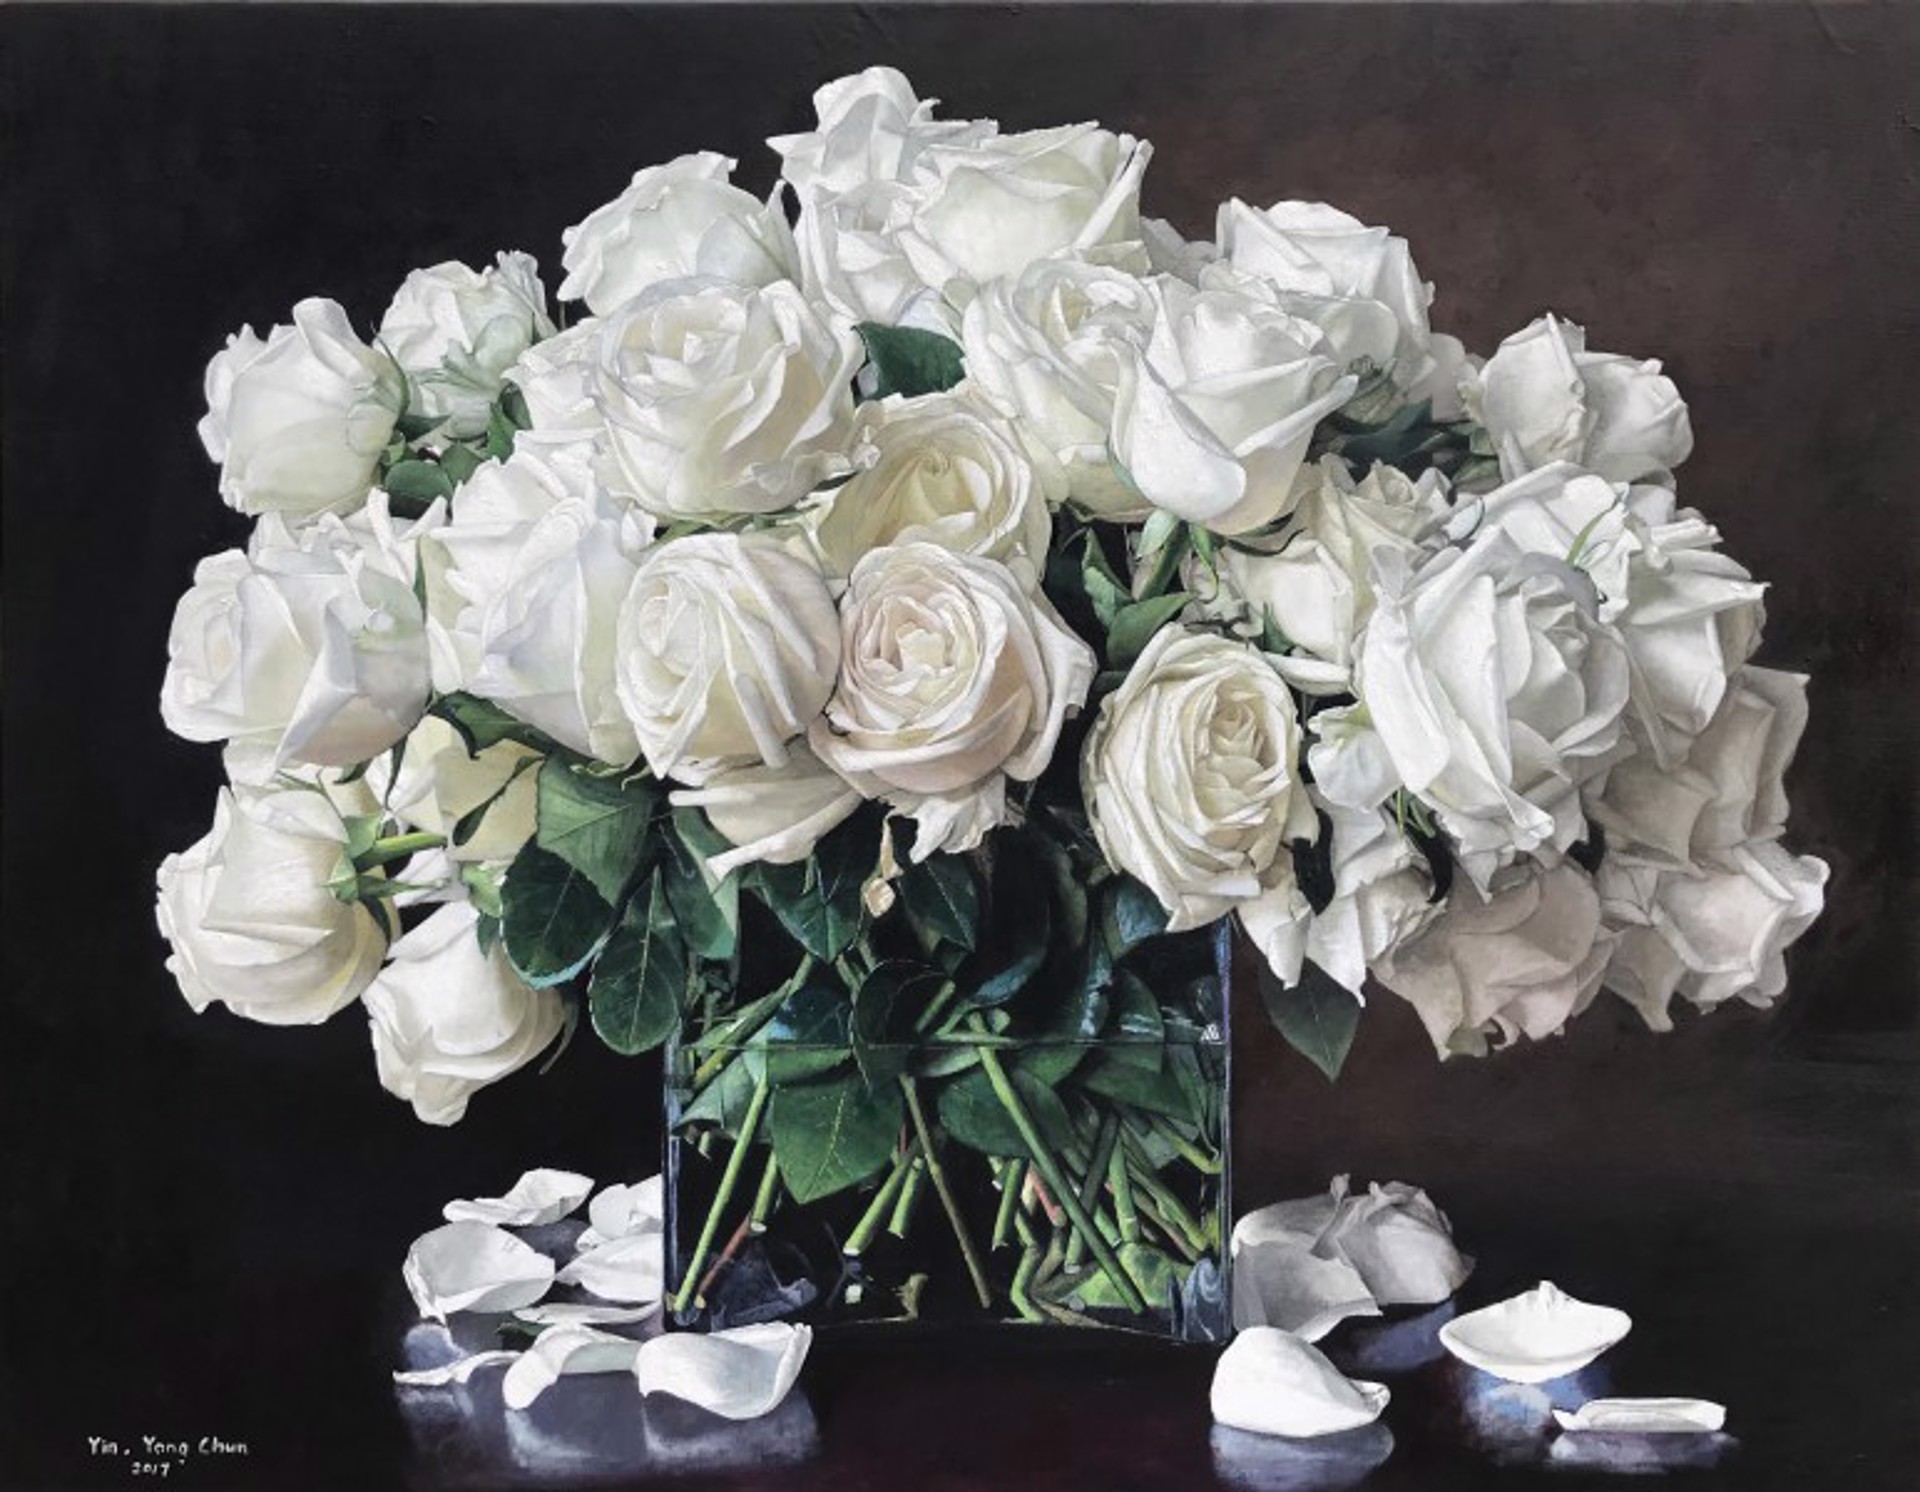 A Glass Vase of White Roses by Yin Yong Chun